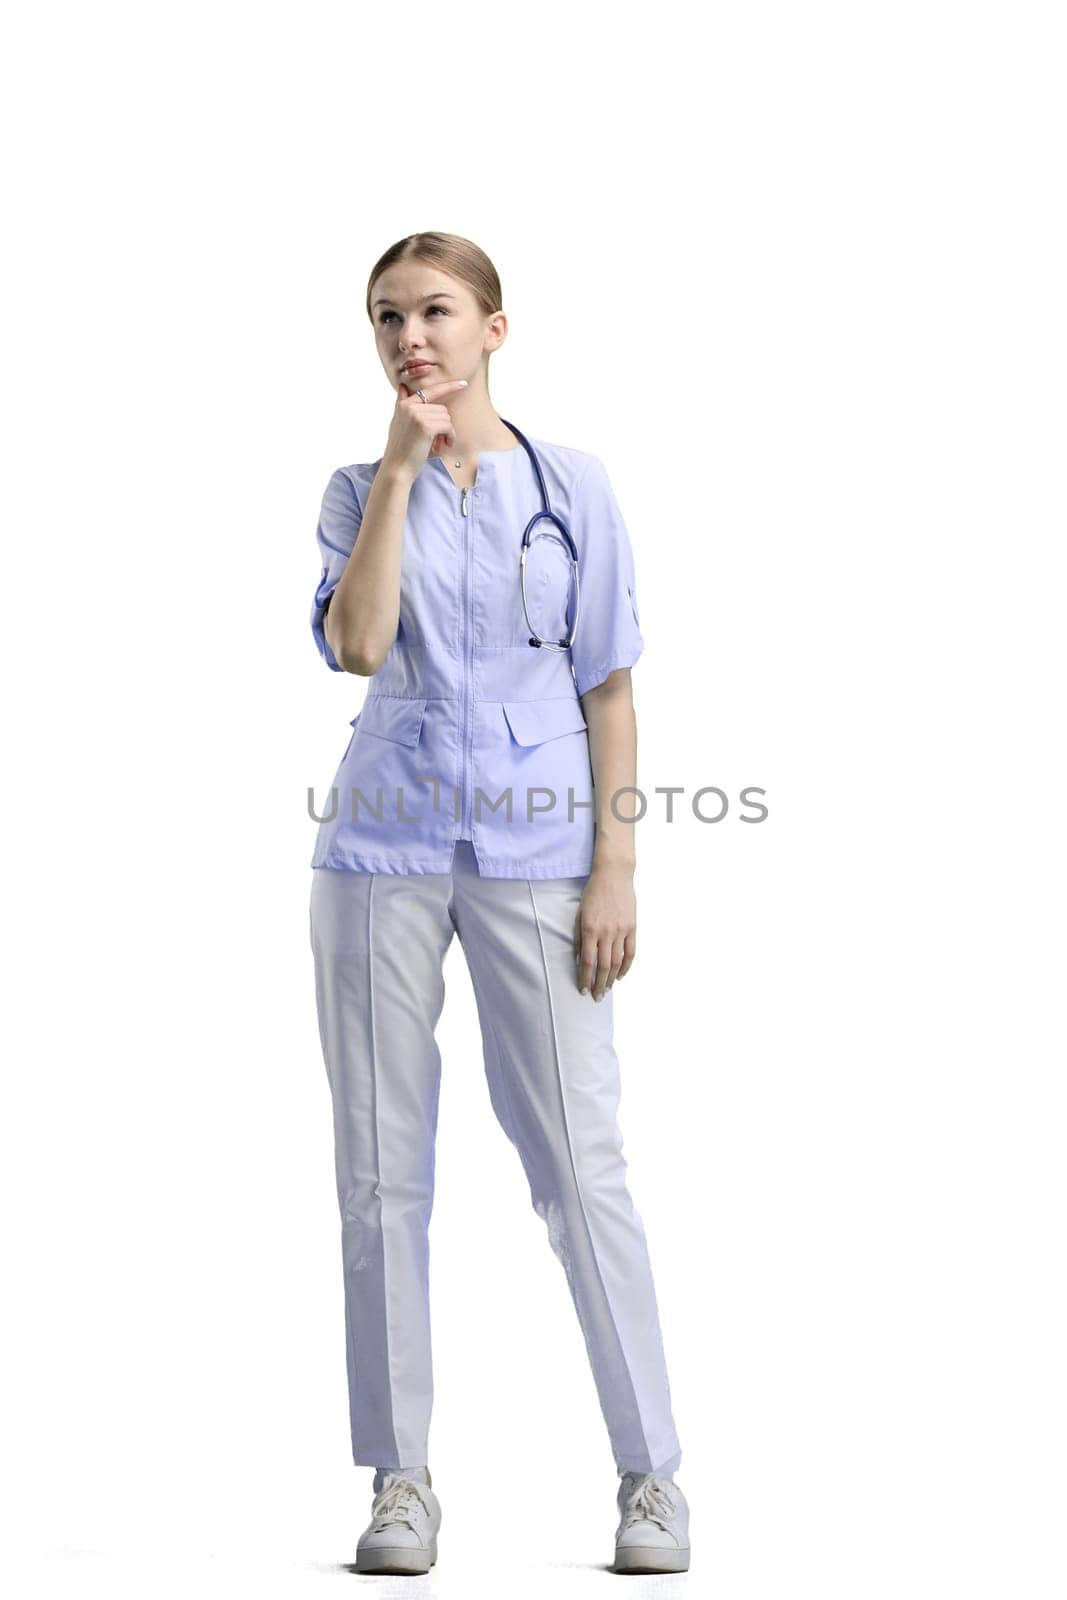 The doctor, in full height, on a white background, thinks by Prosto